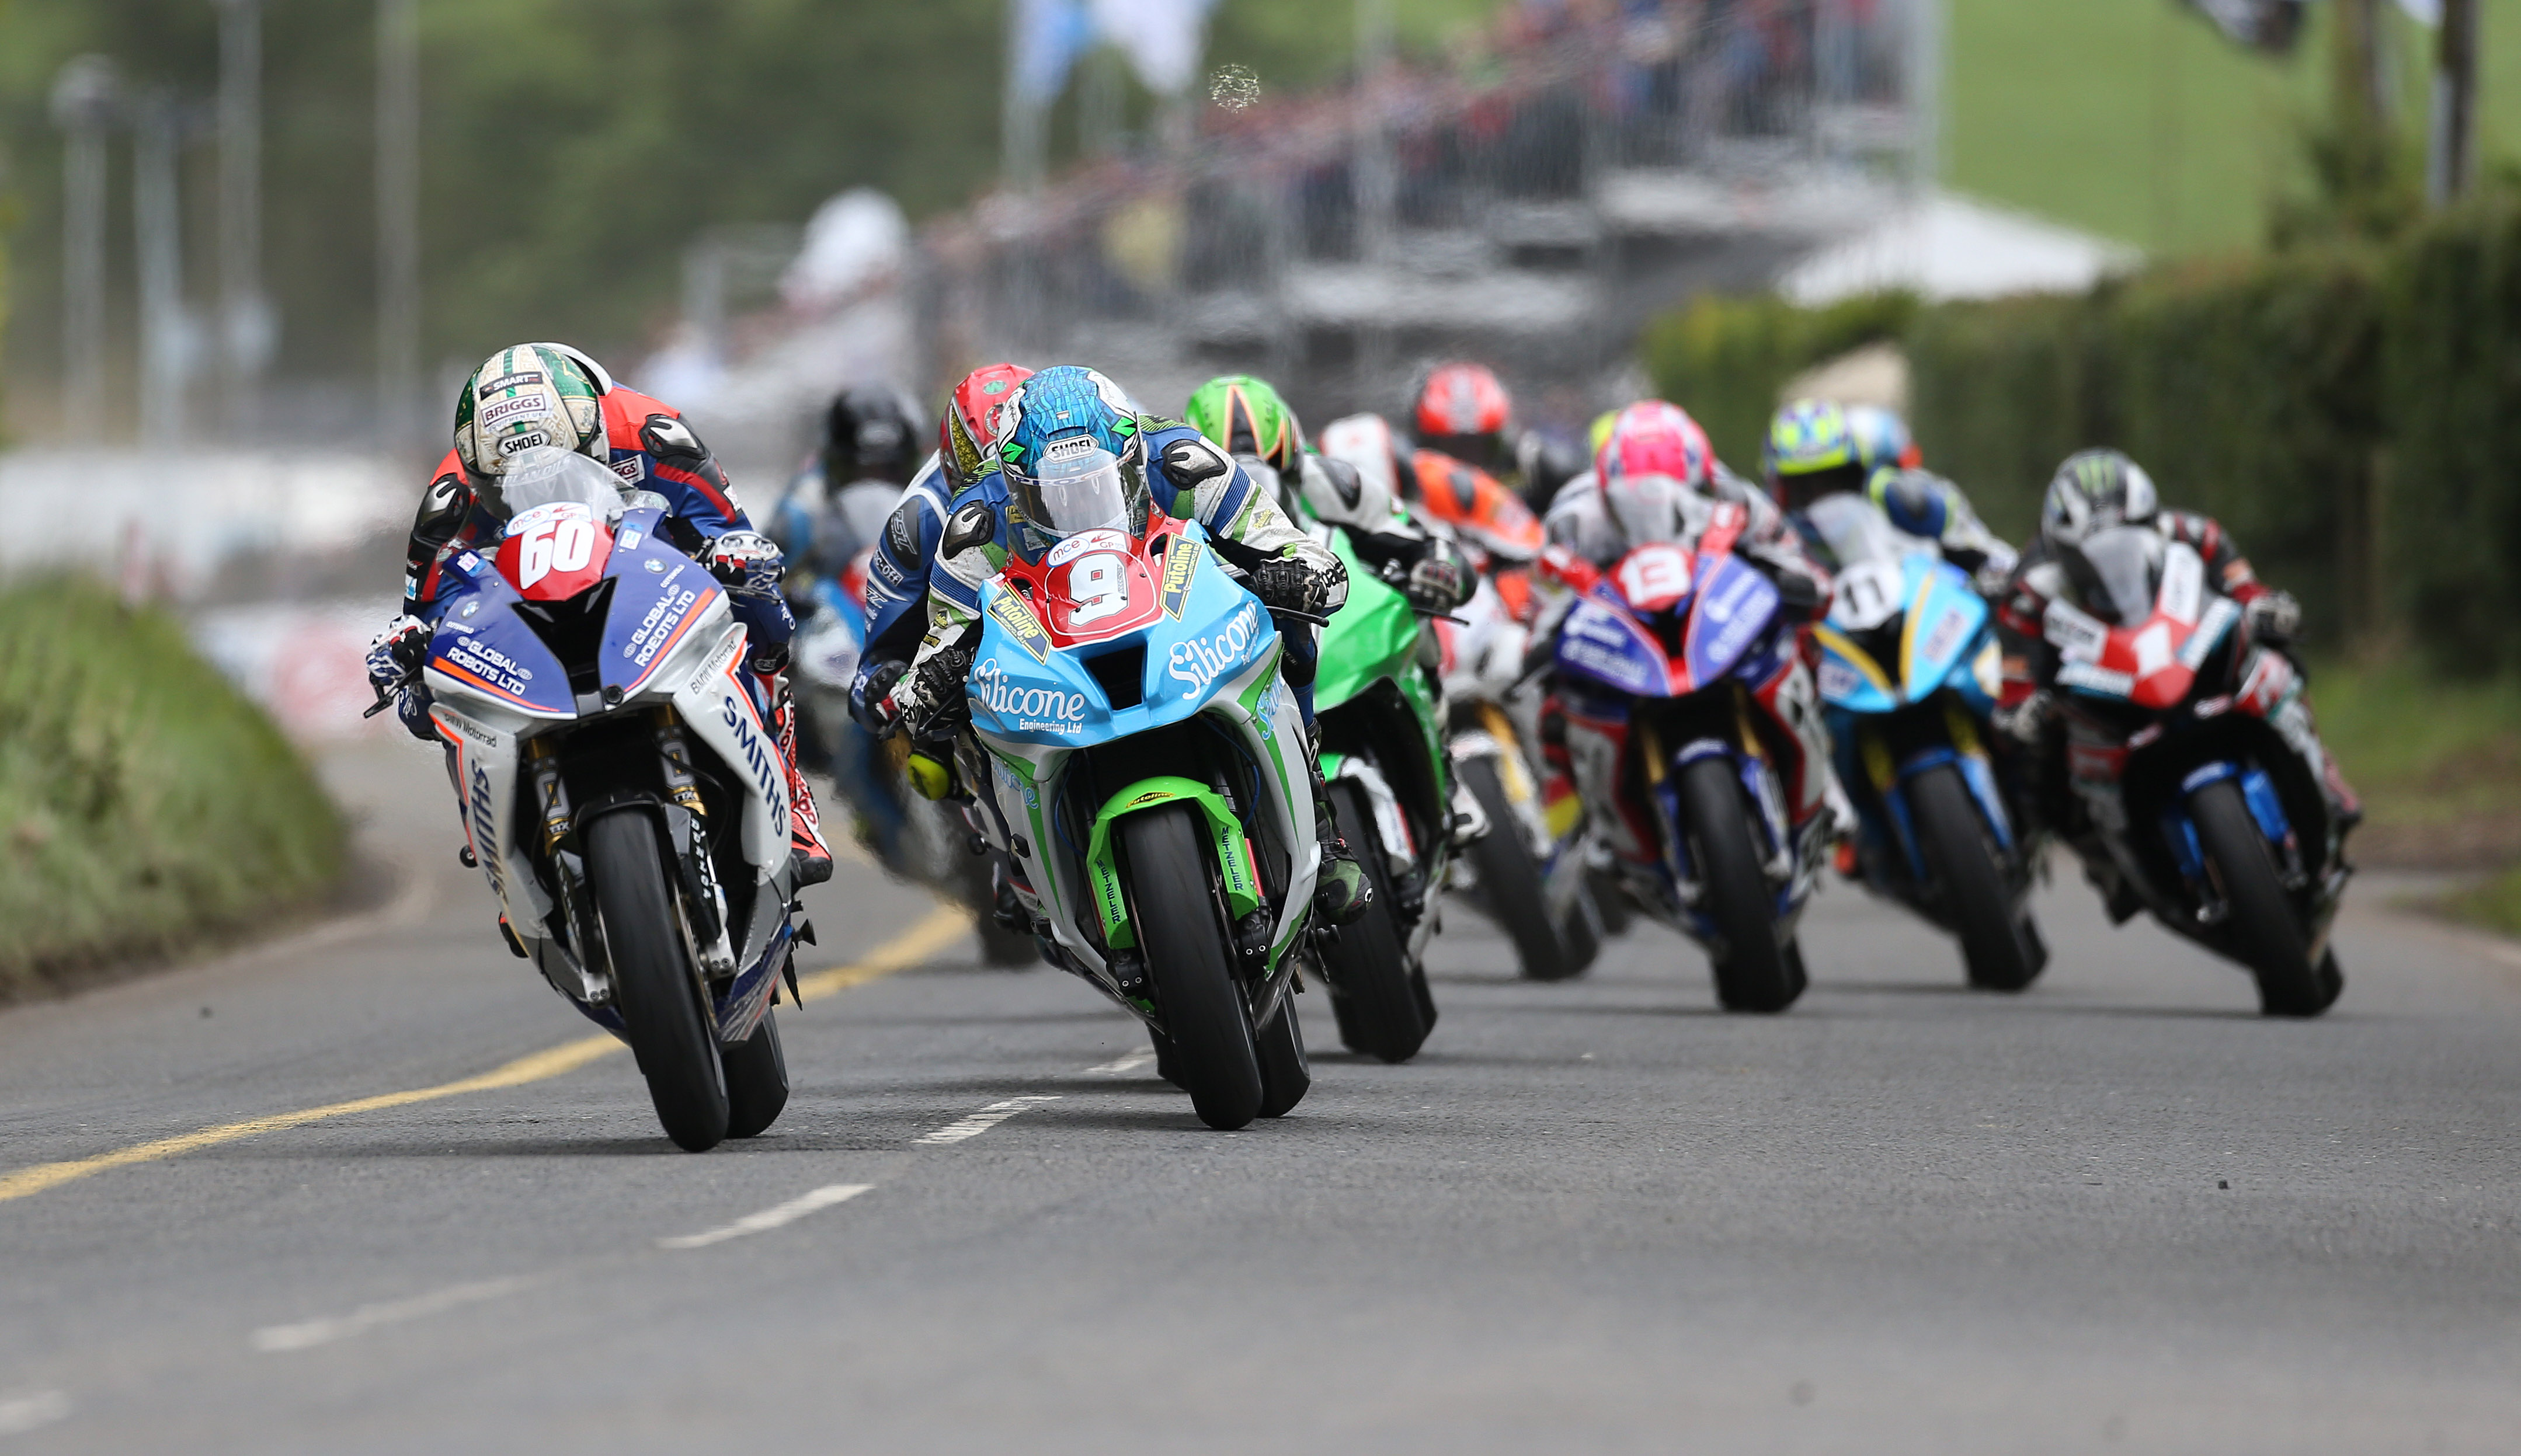 MCE UGP organisers announce big changes to grow event and enhance safety